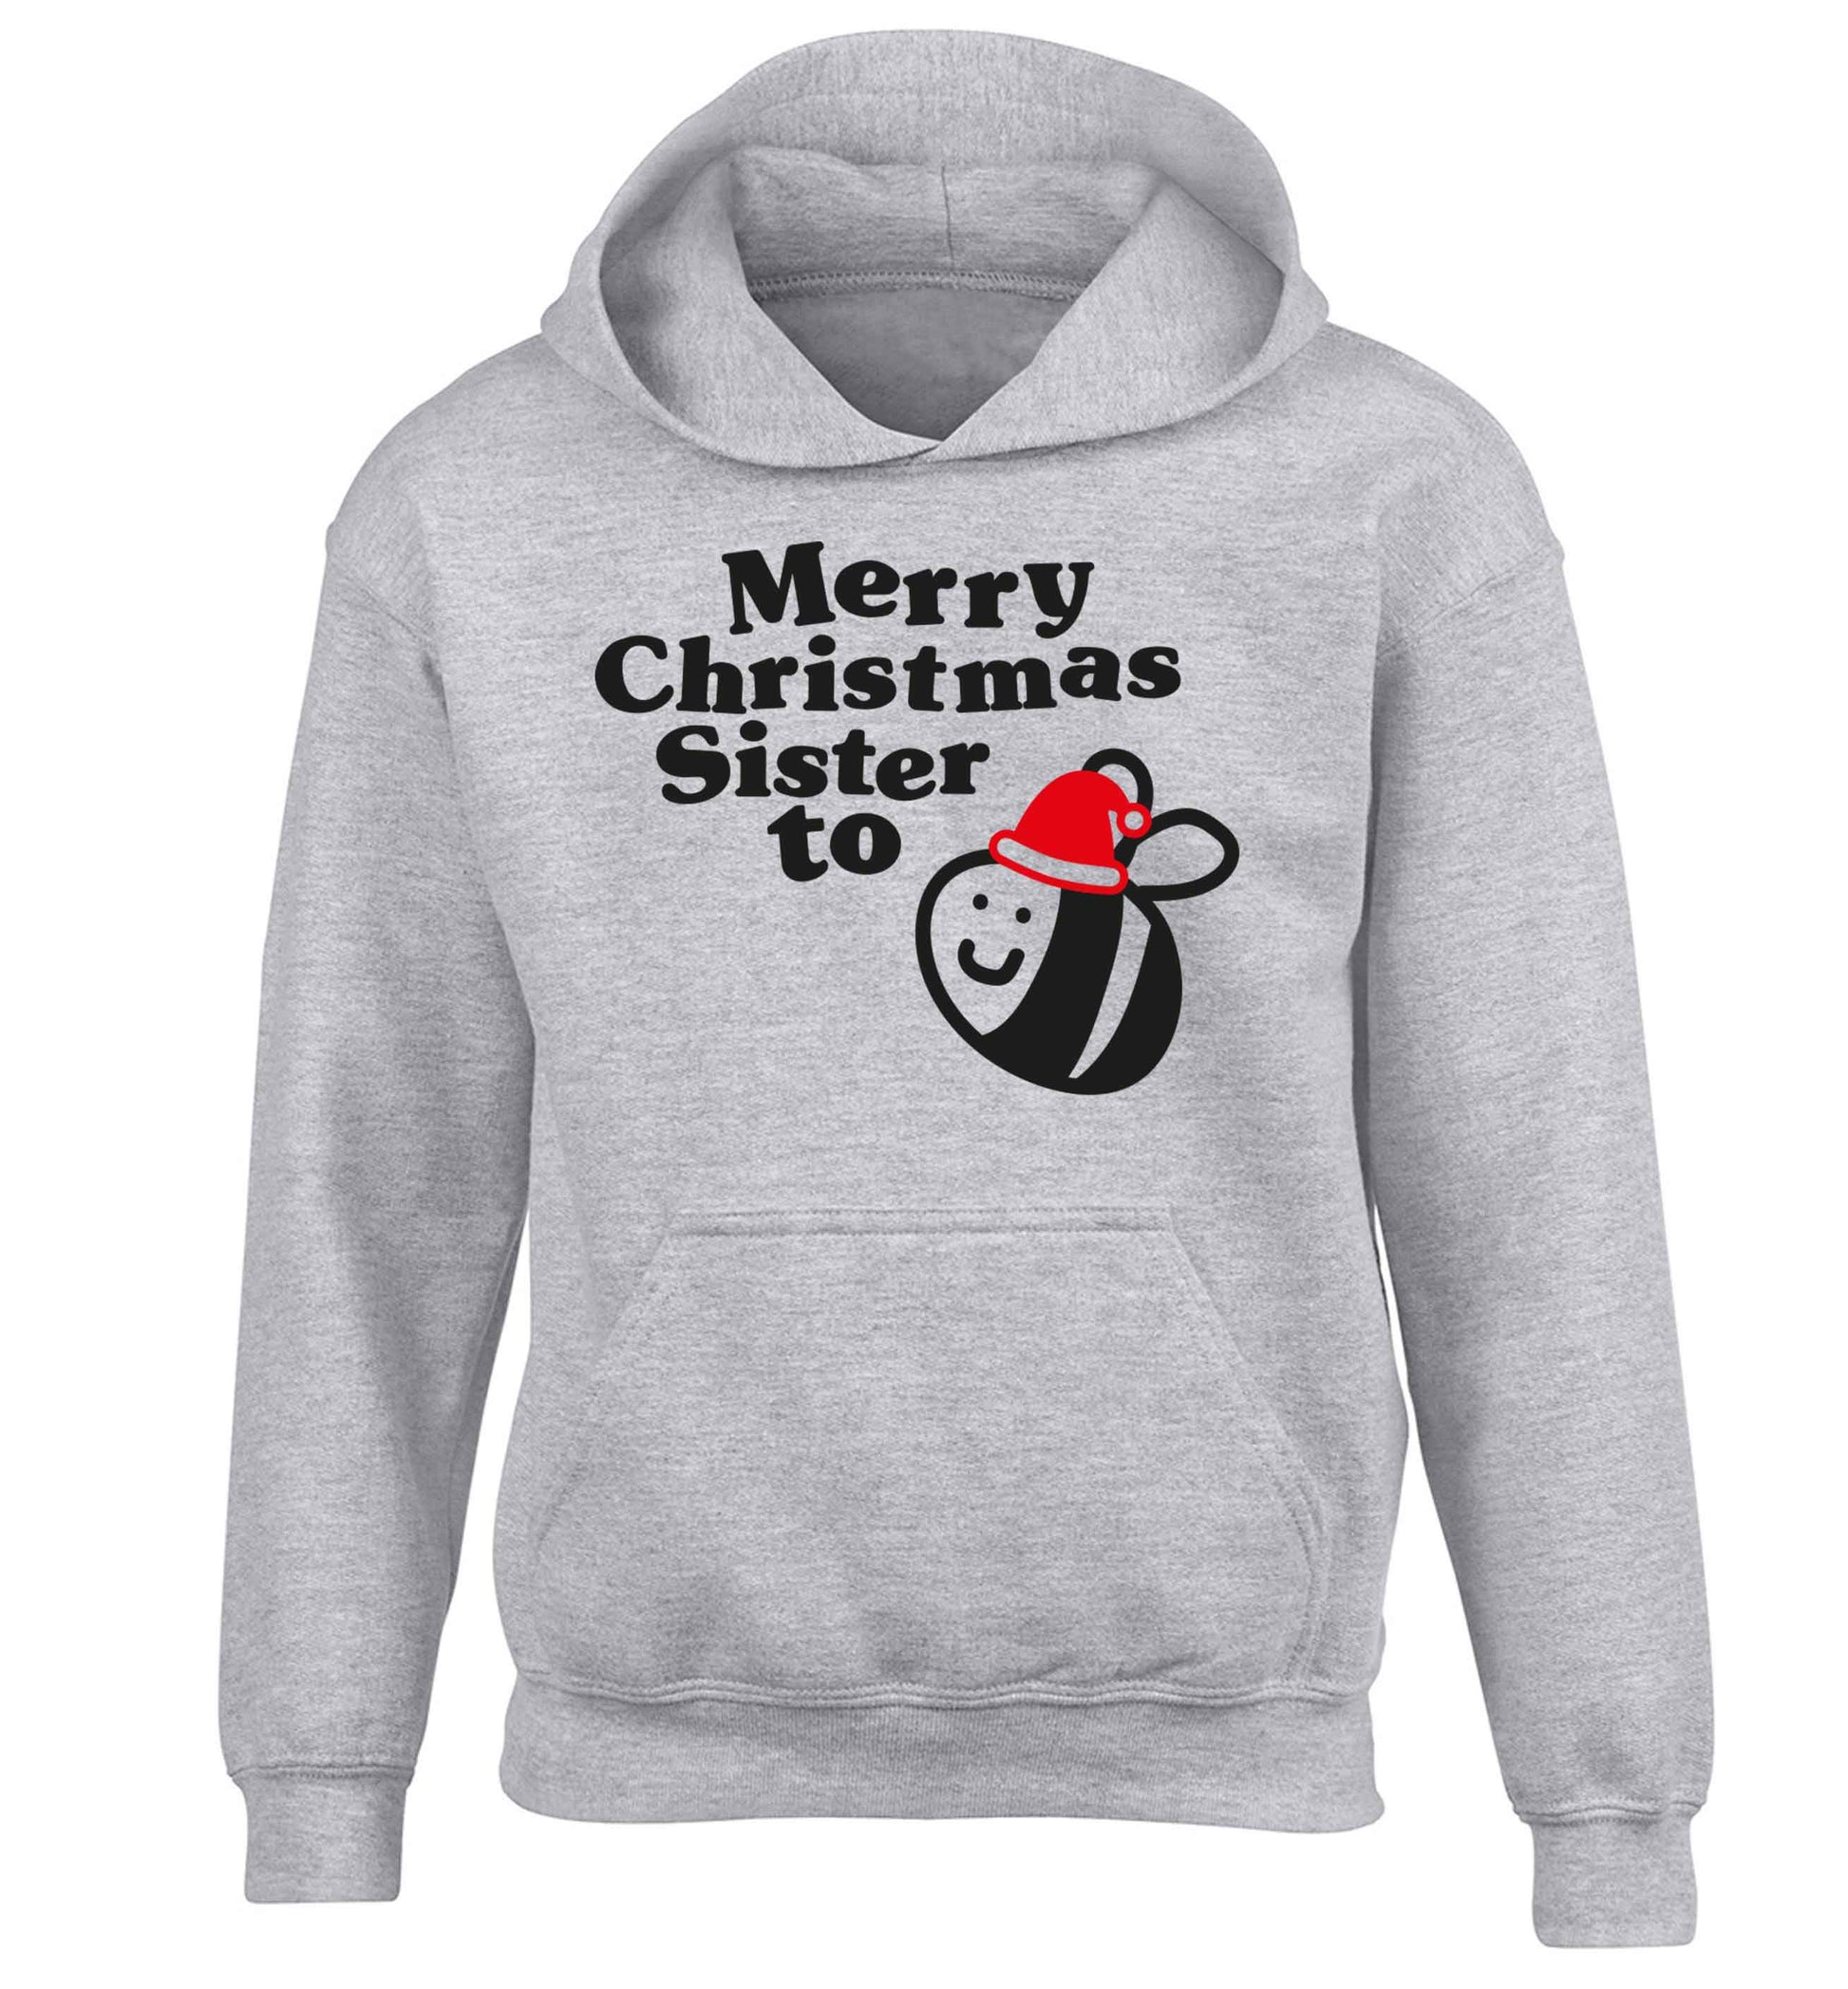 Merry Christmas sister to be children's grey hoodie 12-13 Years